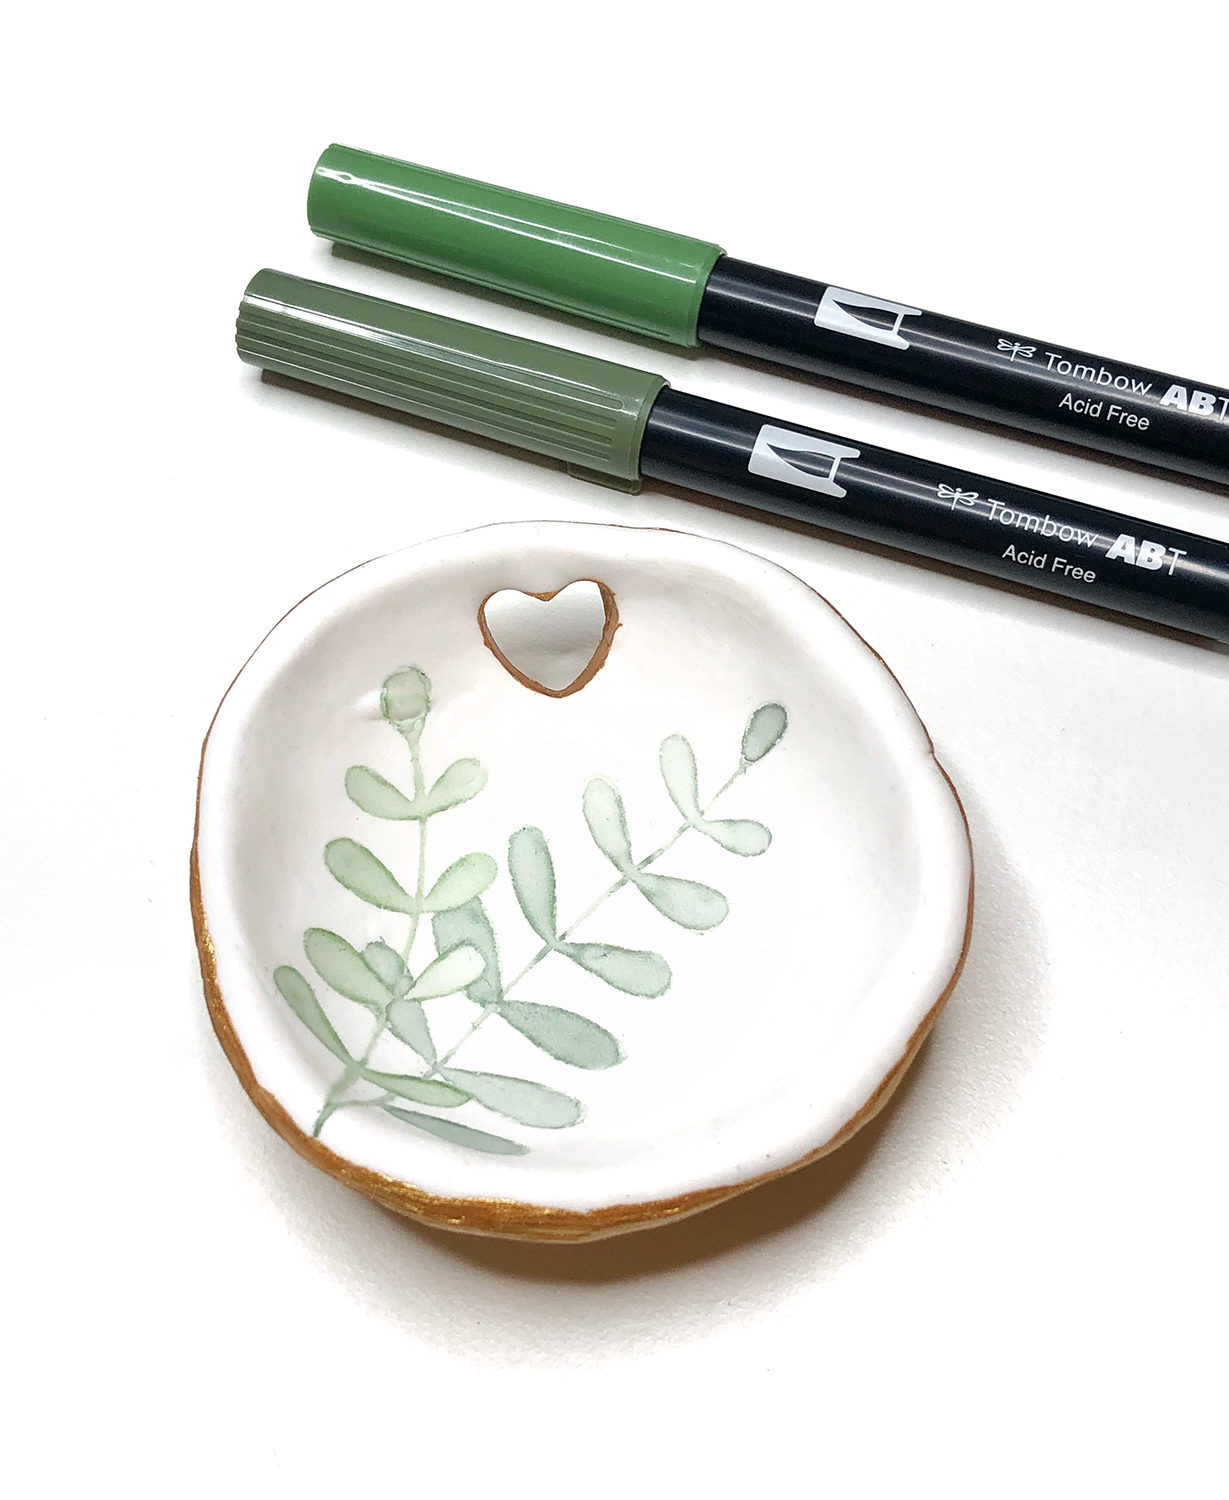 Make a Decorated Ring Bowl for Mother's Day by Jessica Mack on behalf of Tombow